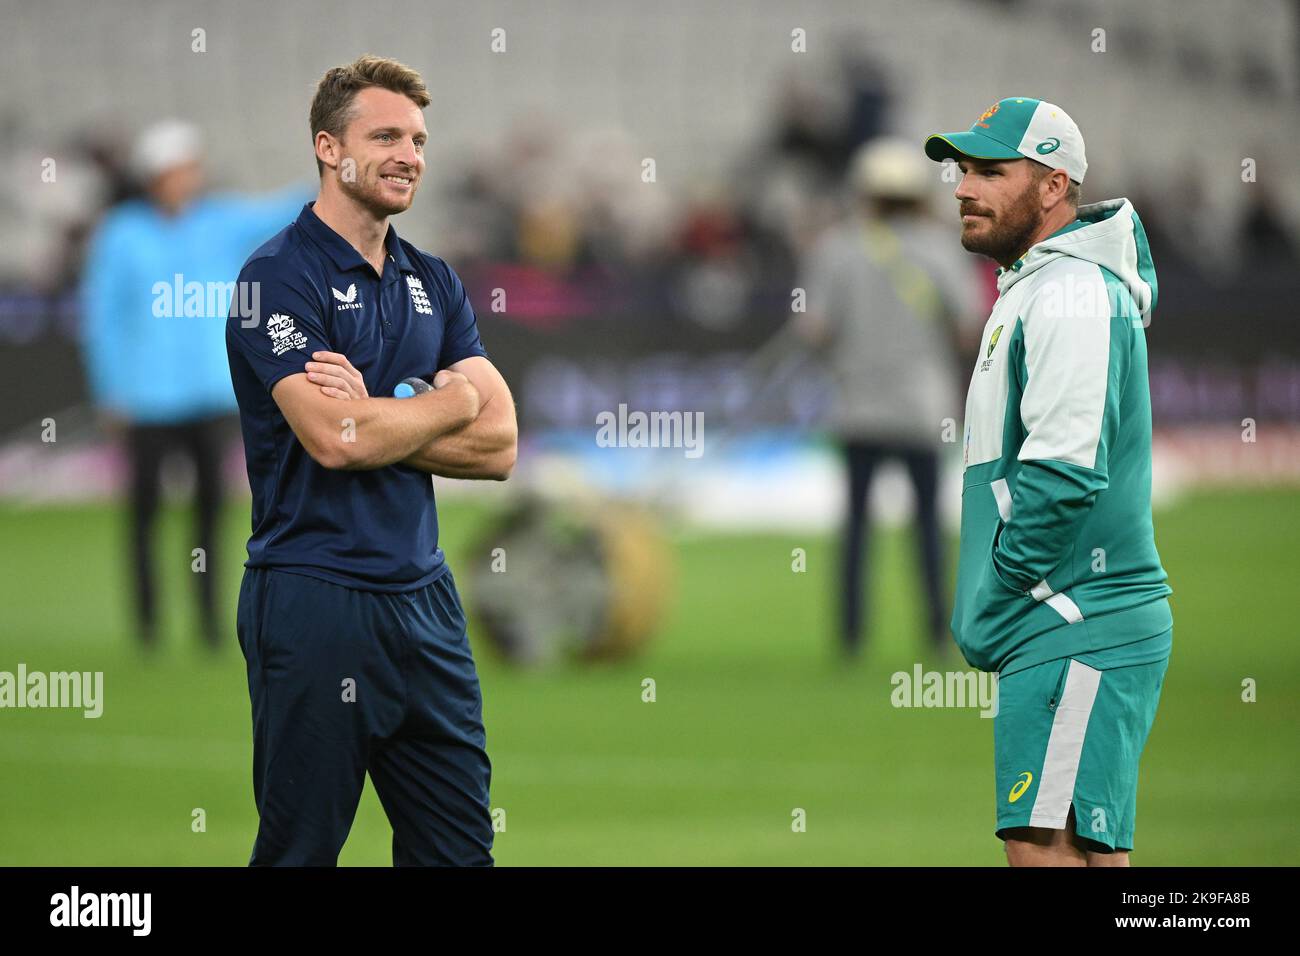 England's Jos Buttler (left) and Australia's Aaron Finch ahead of the T20 World Cup Super 12 match at Melbourne Cricket Ground in Melbourne, Australia. Picture date: Friday October 28, 2022. Stock Photo